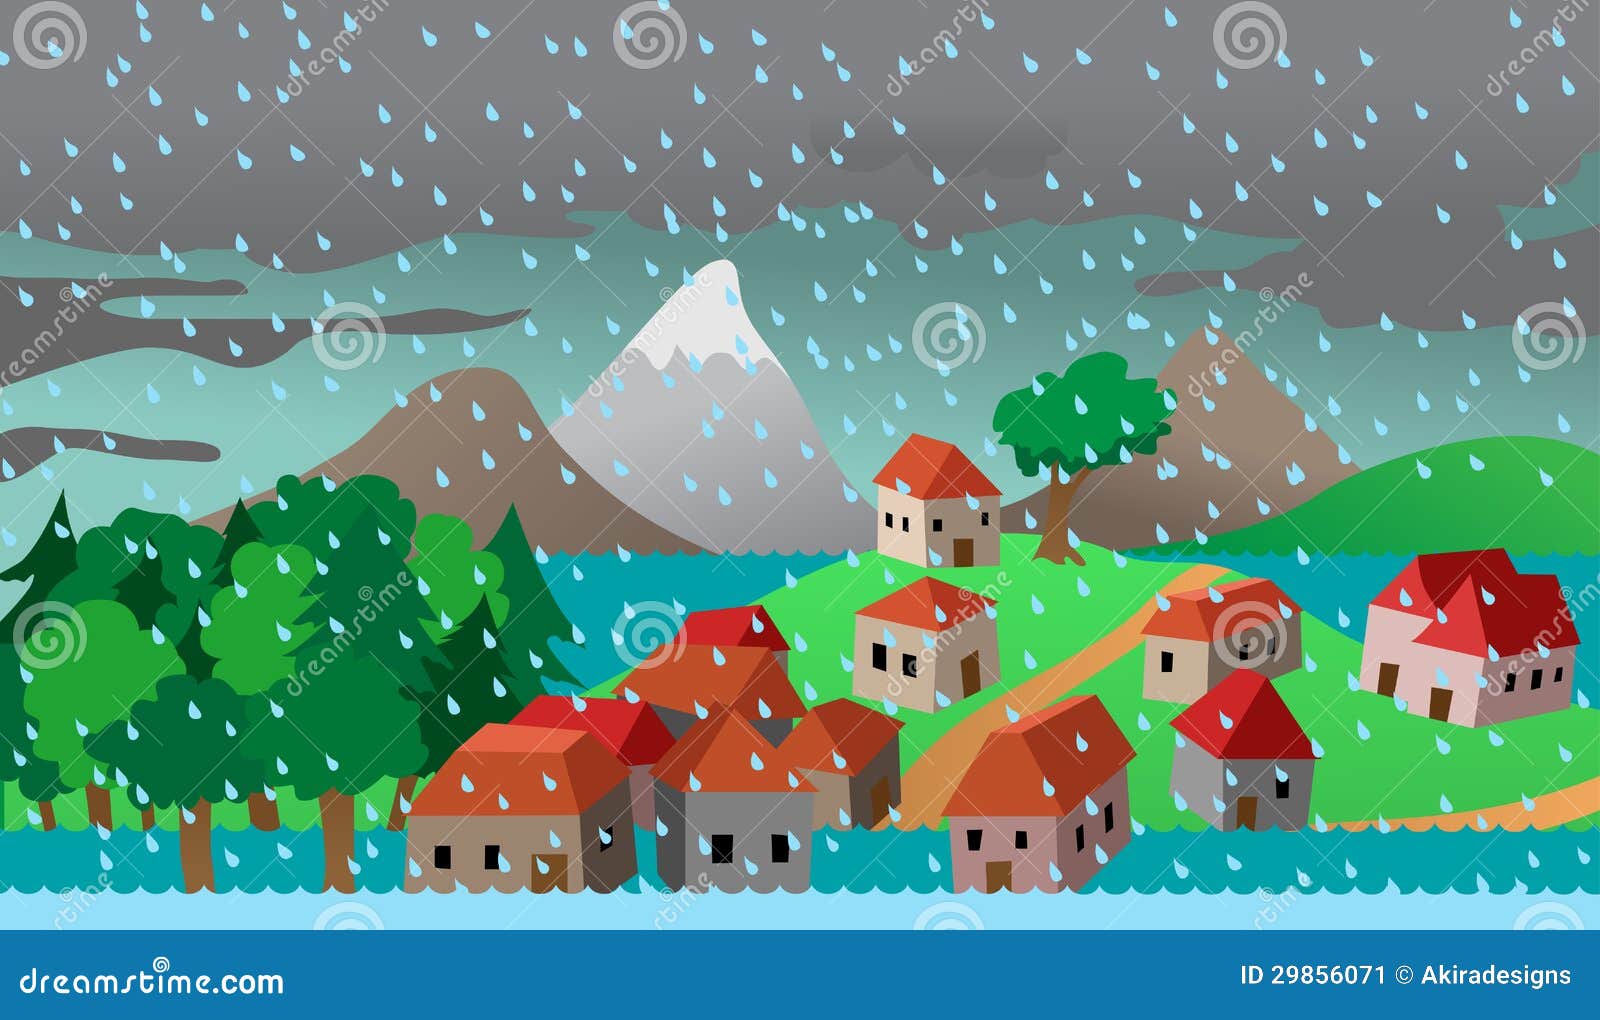 Town Or Village Houses In Flood Stock Image - Image: 29856071